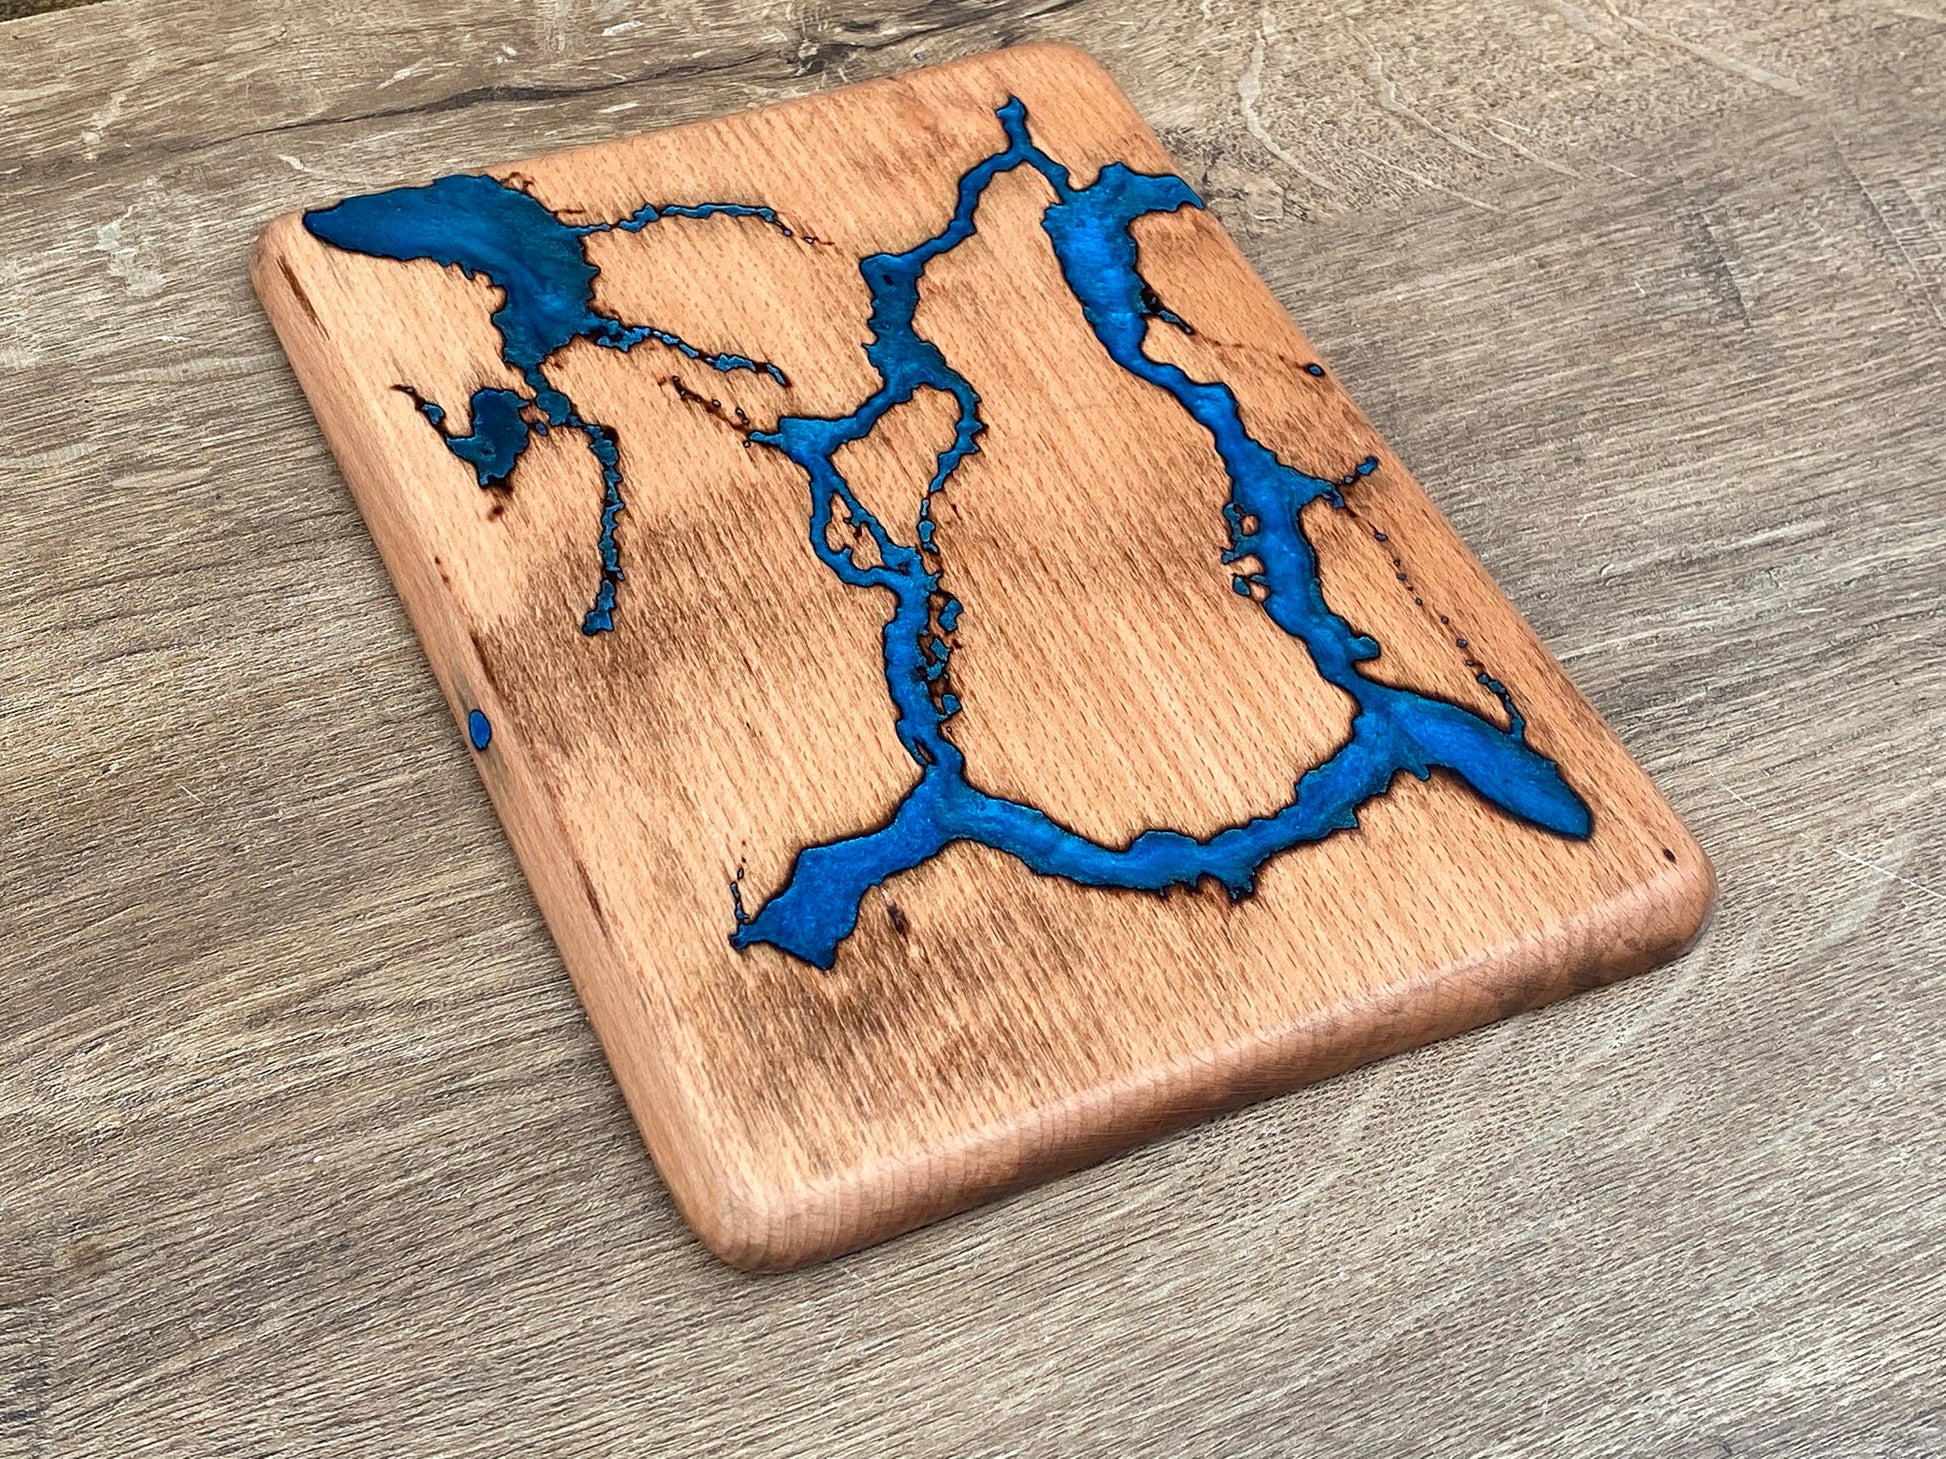 Epoxy board, epoxy resin board, serving tray, cutting board, live edge, resin river, epoxy table, wooden gift,charcuterie,Christmas,birthday